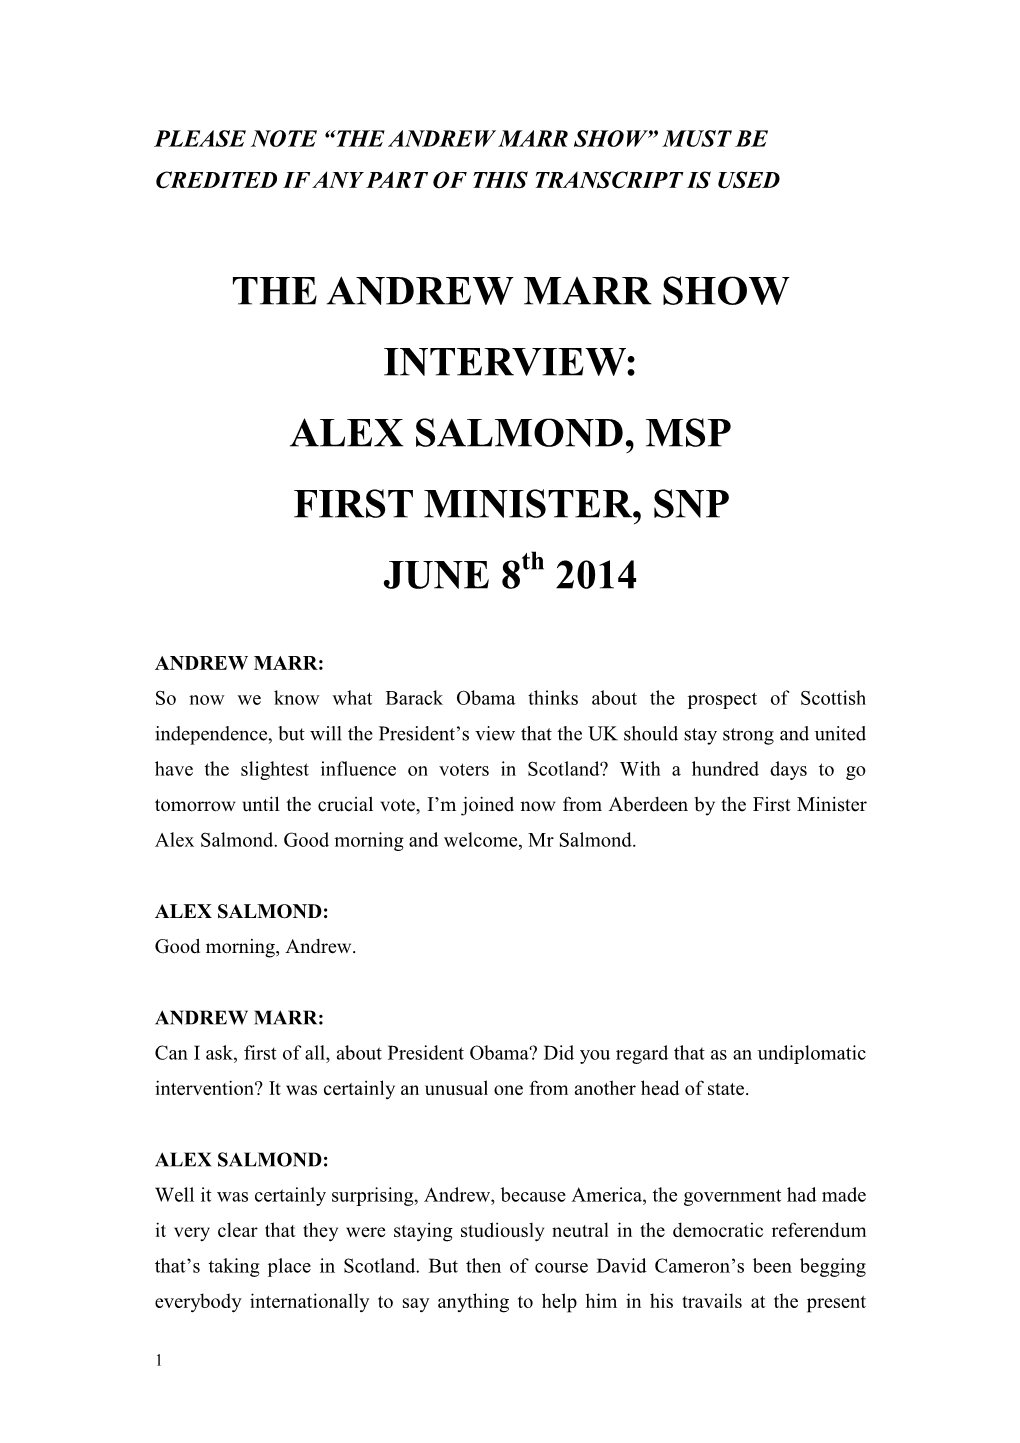 The Andrew Marr Show Interview: Alex Salmond, Msp First Minister, Snp June 8 2014